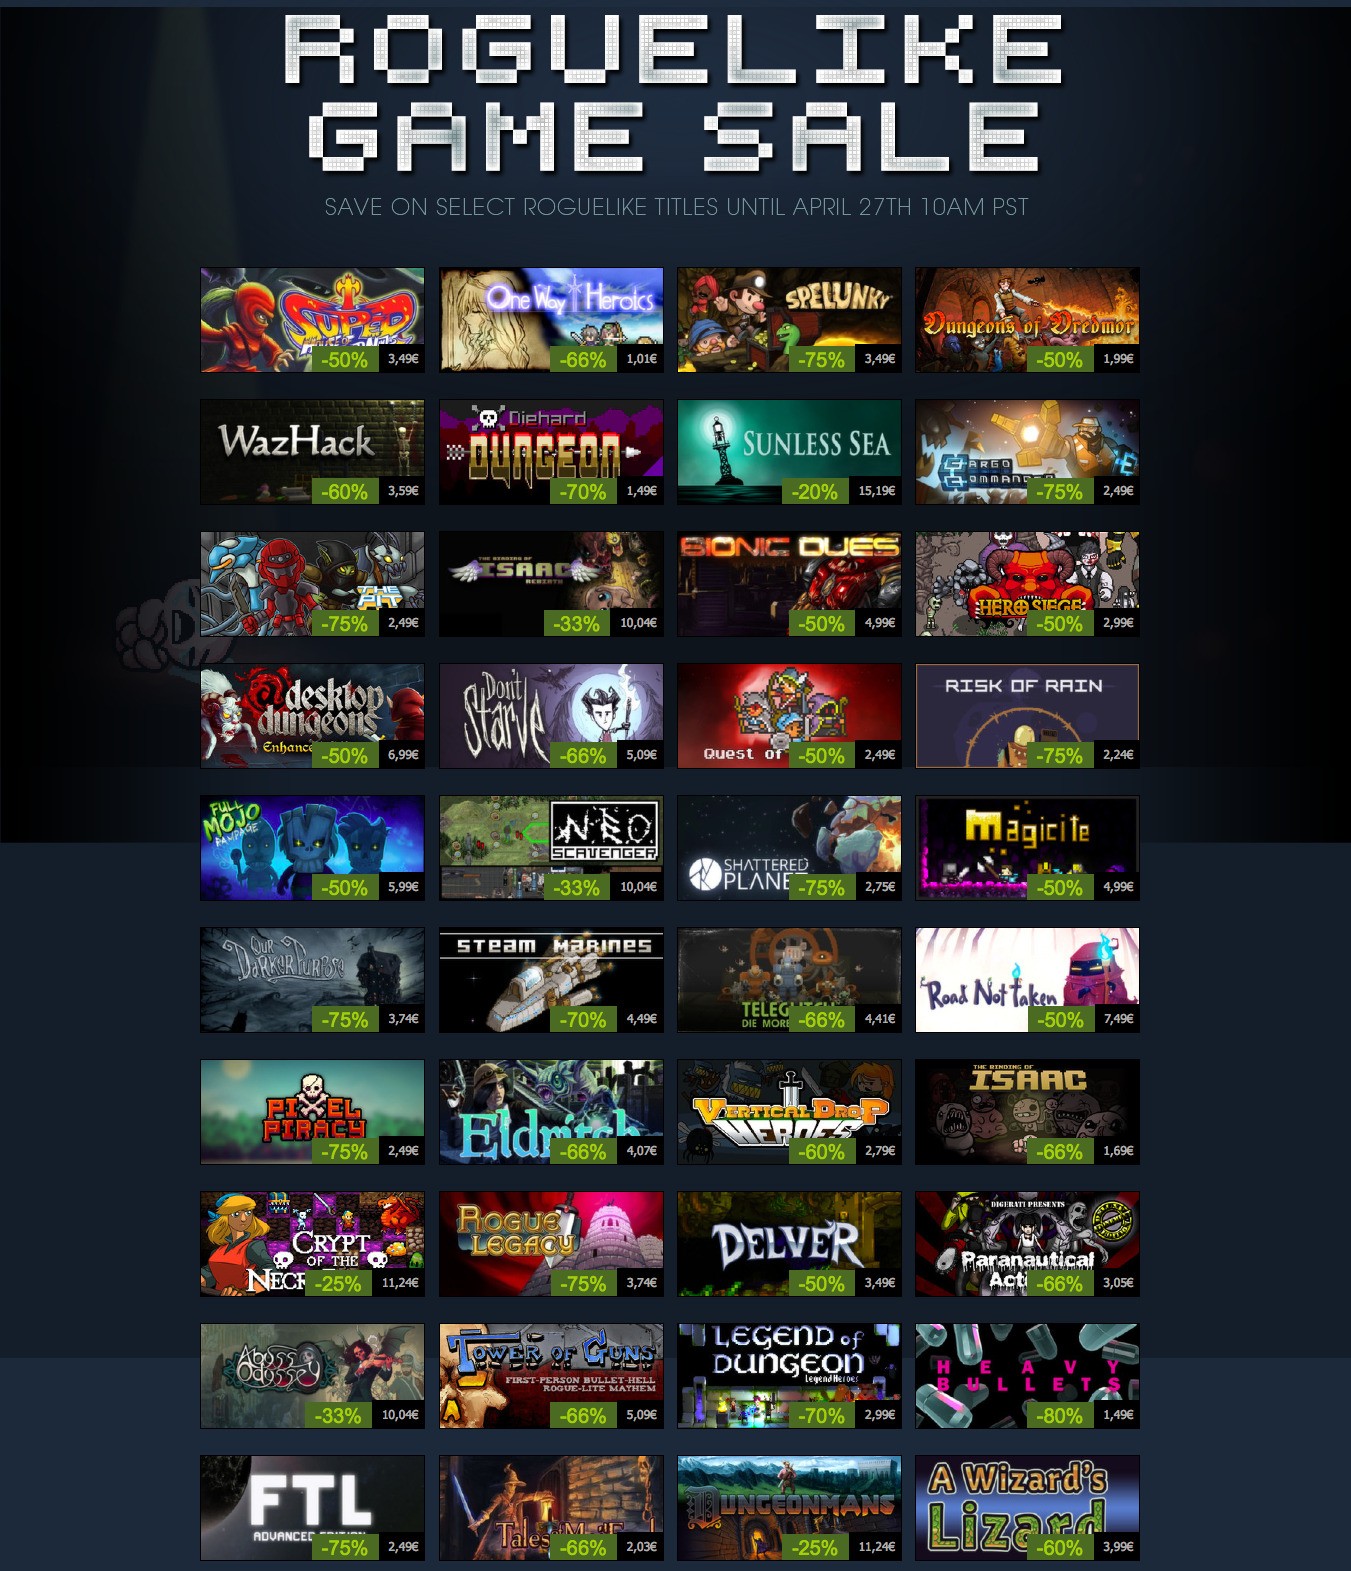 steam games for mac and windows